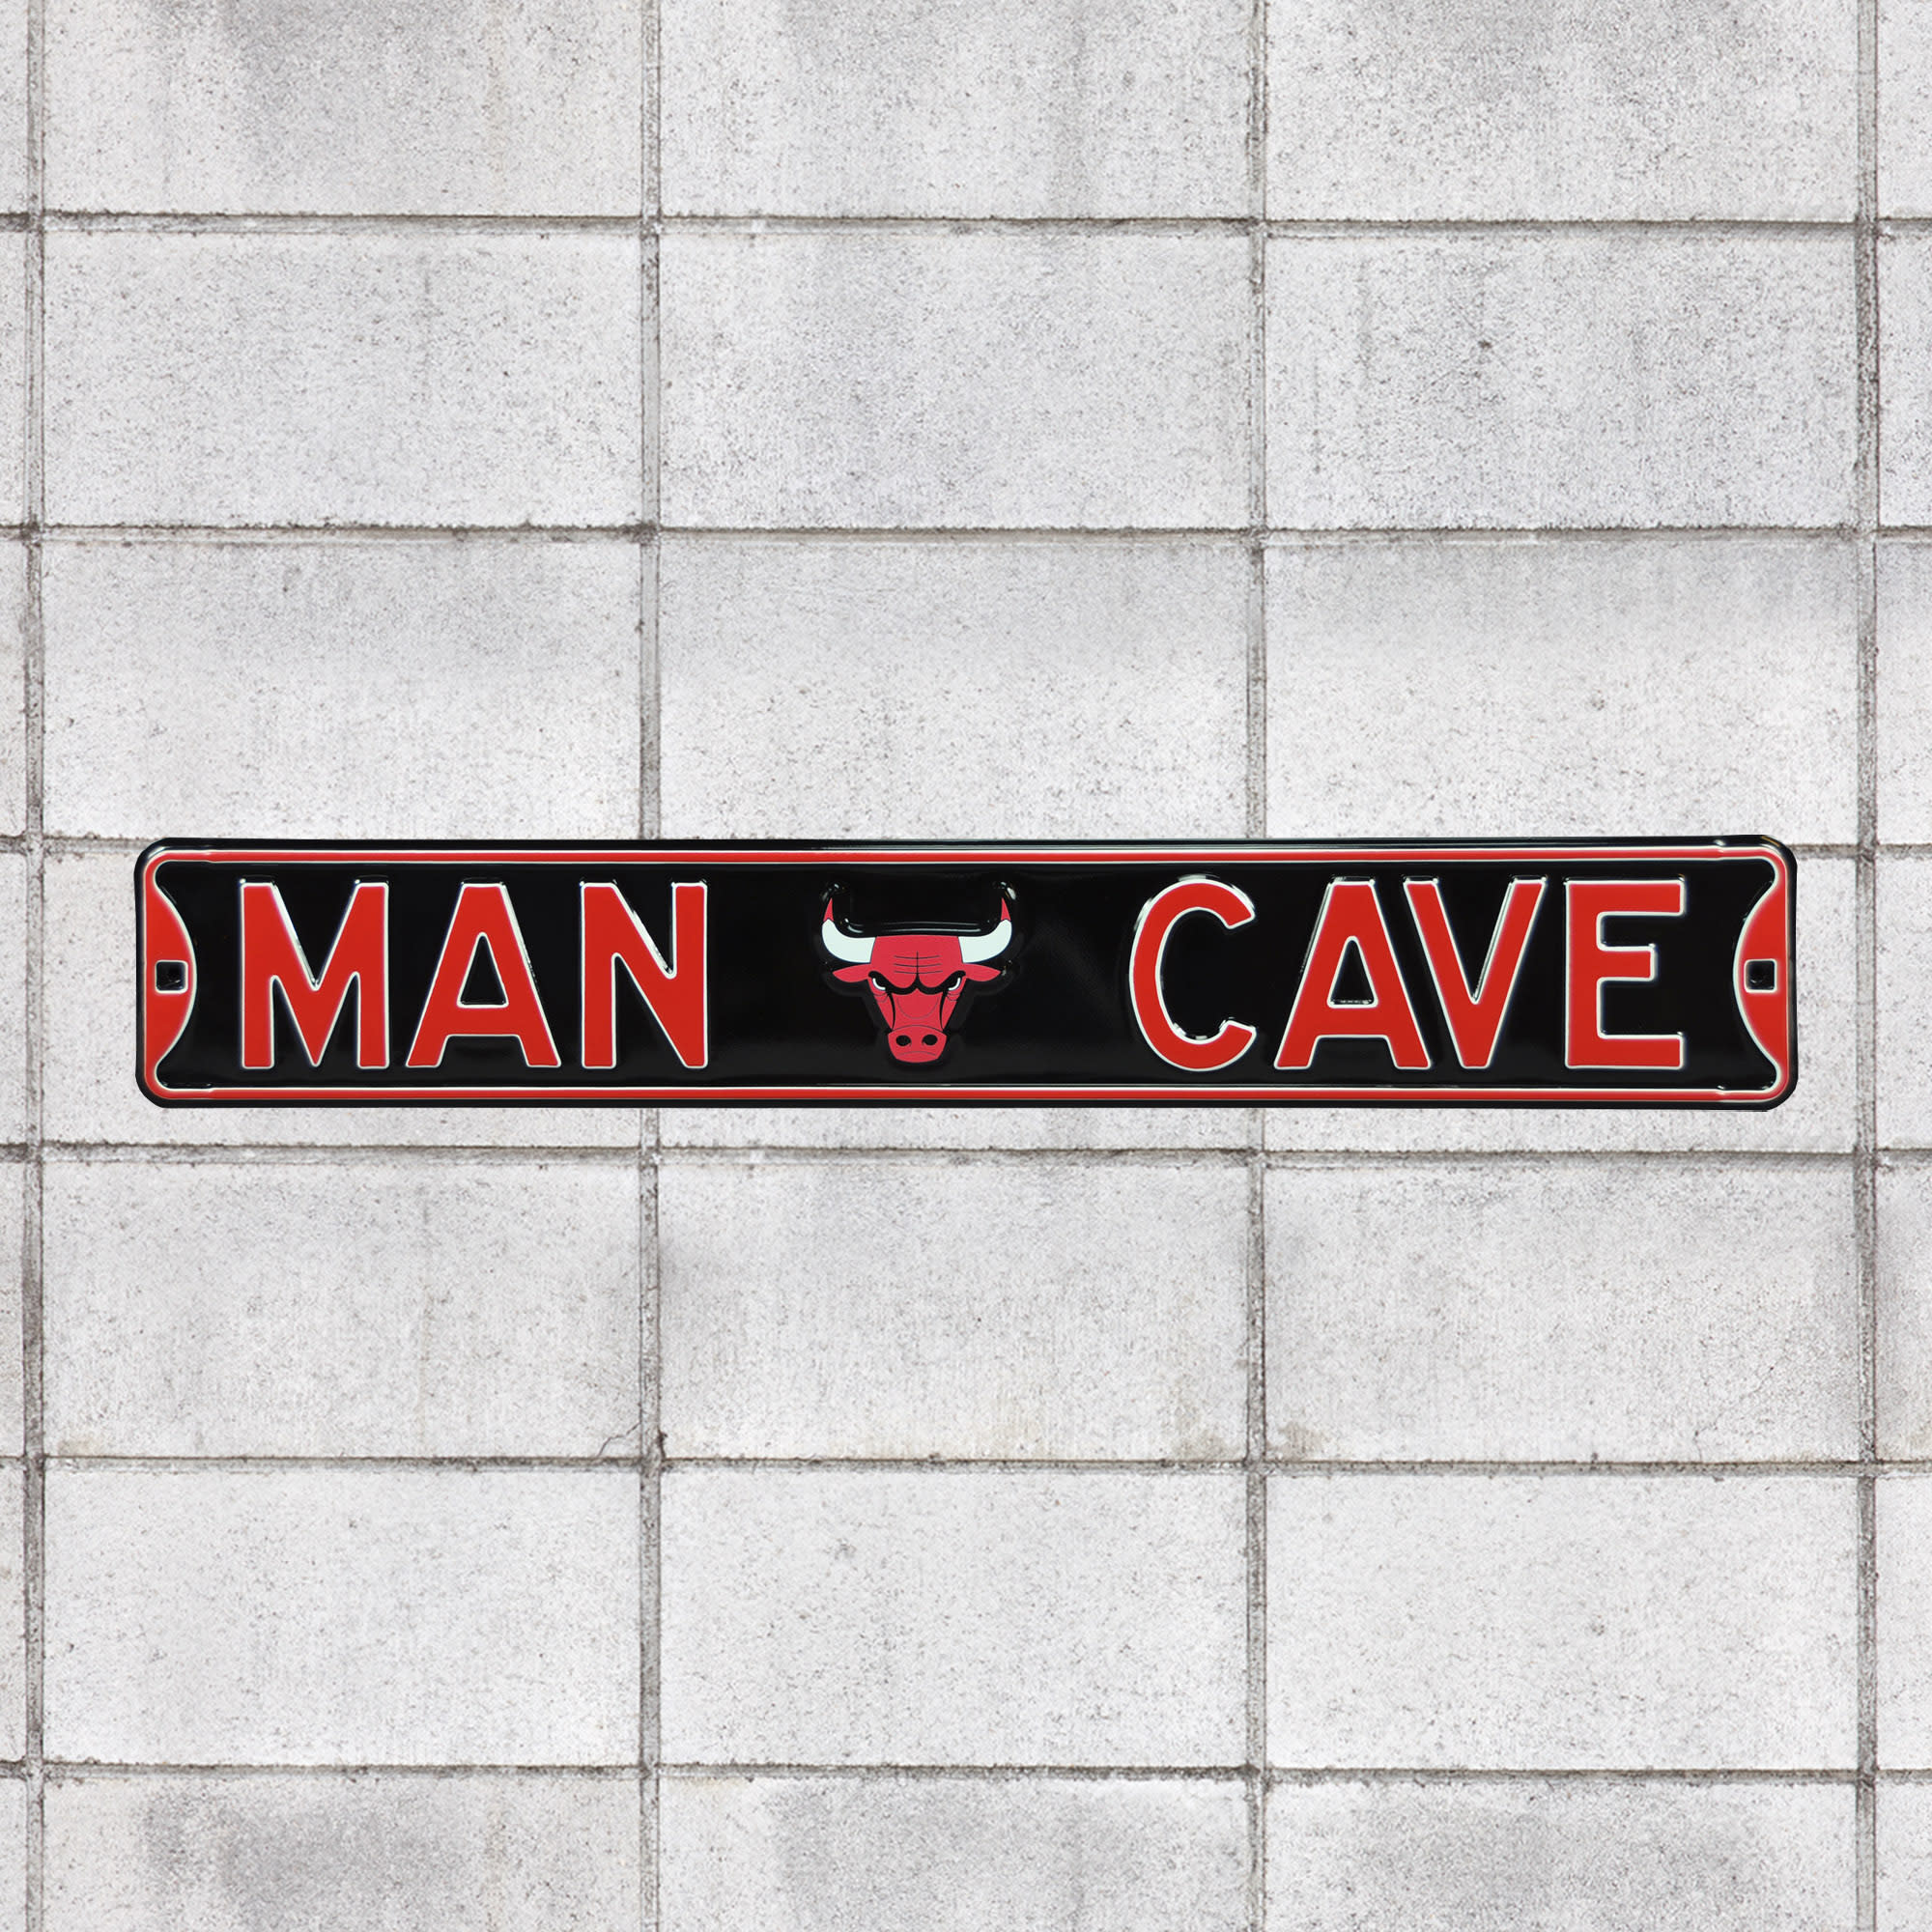 Chicago Bulls: Man Cave - Officially Licensed NBA Metal Street Sign 36.0"W x 6.0"H by Fathead | 100% Steel